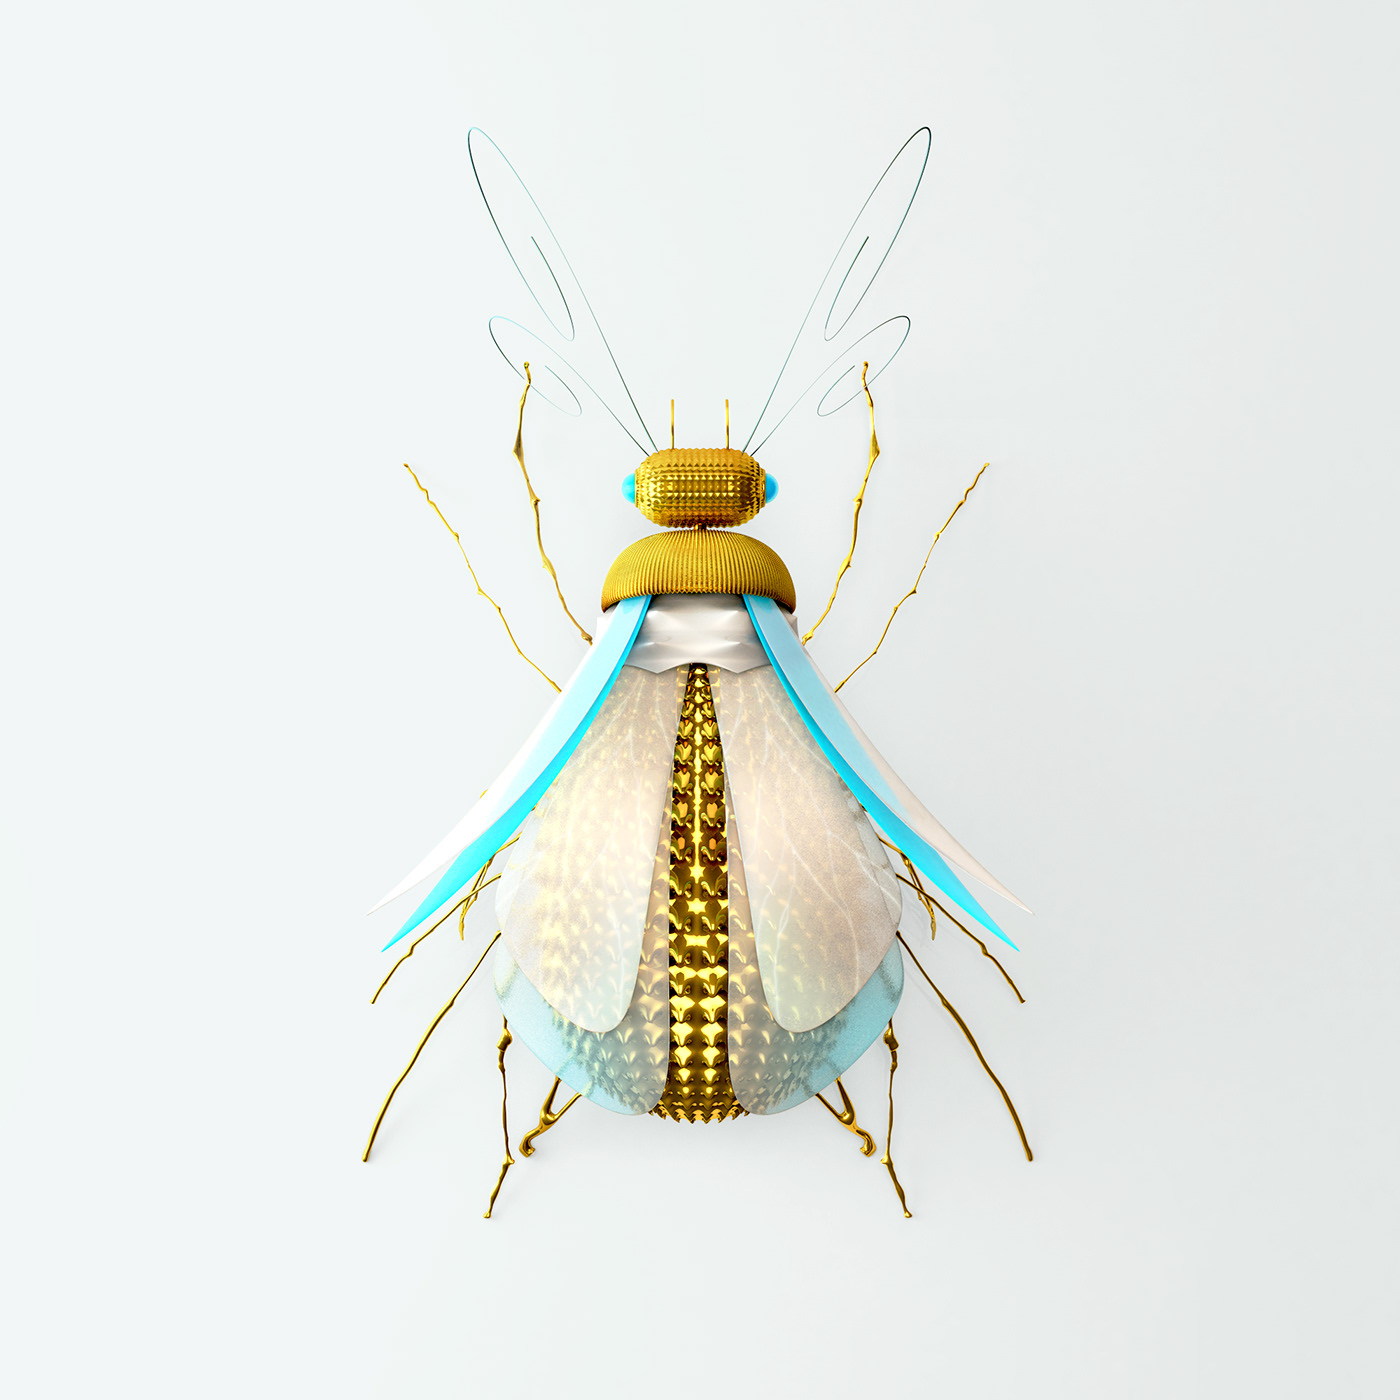 bugs Insects 3D cinema 4d c4d